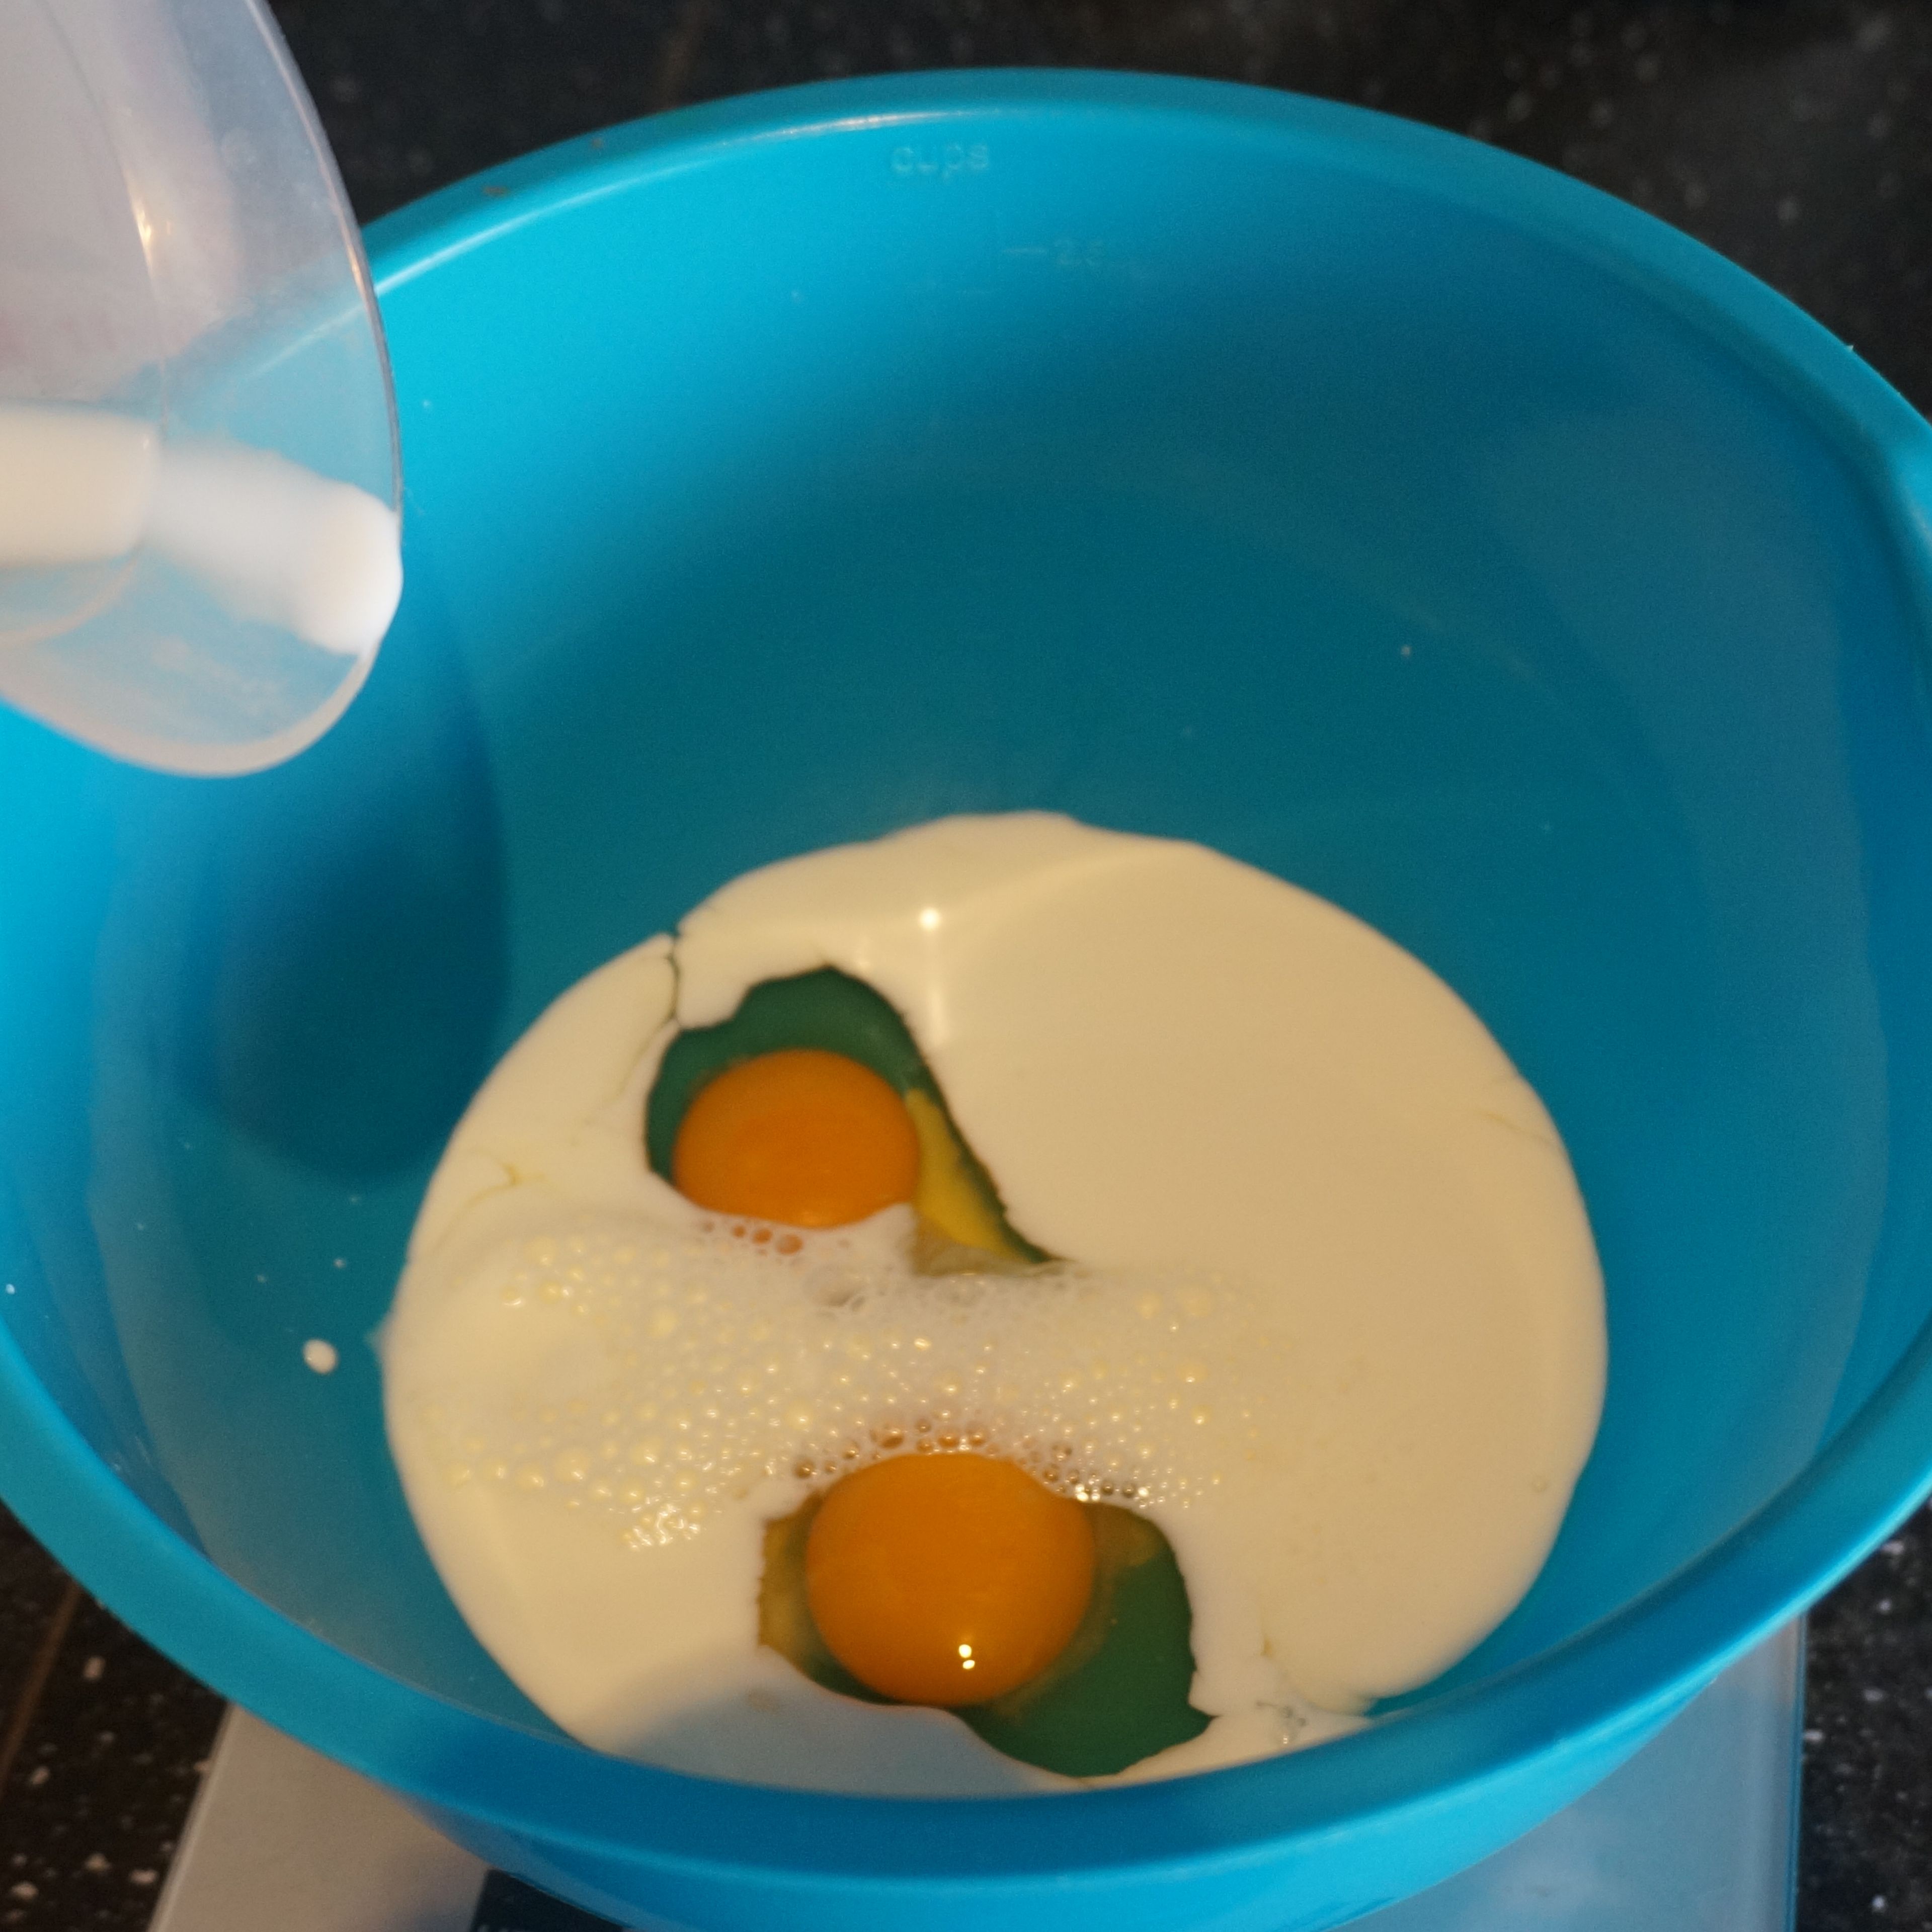 Put milk, a pinch of salt, sugar into a large bowl, crack 2 eggs and mix well.